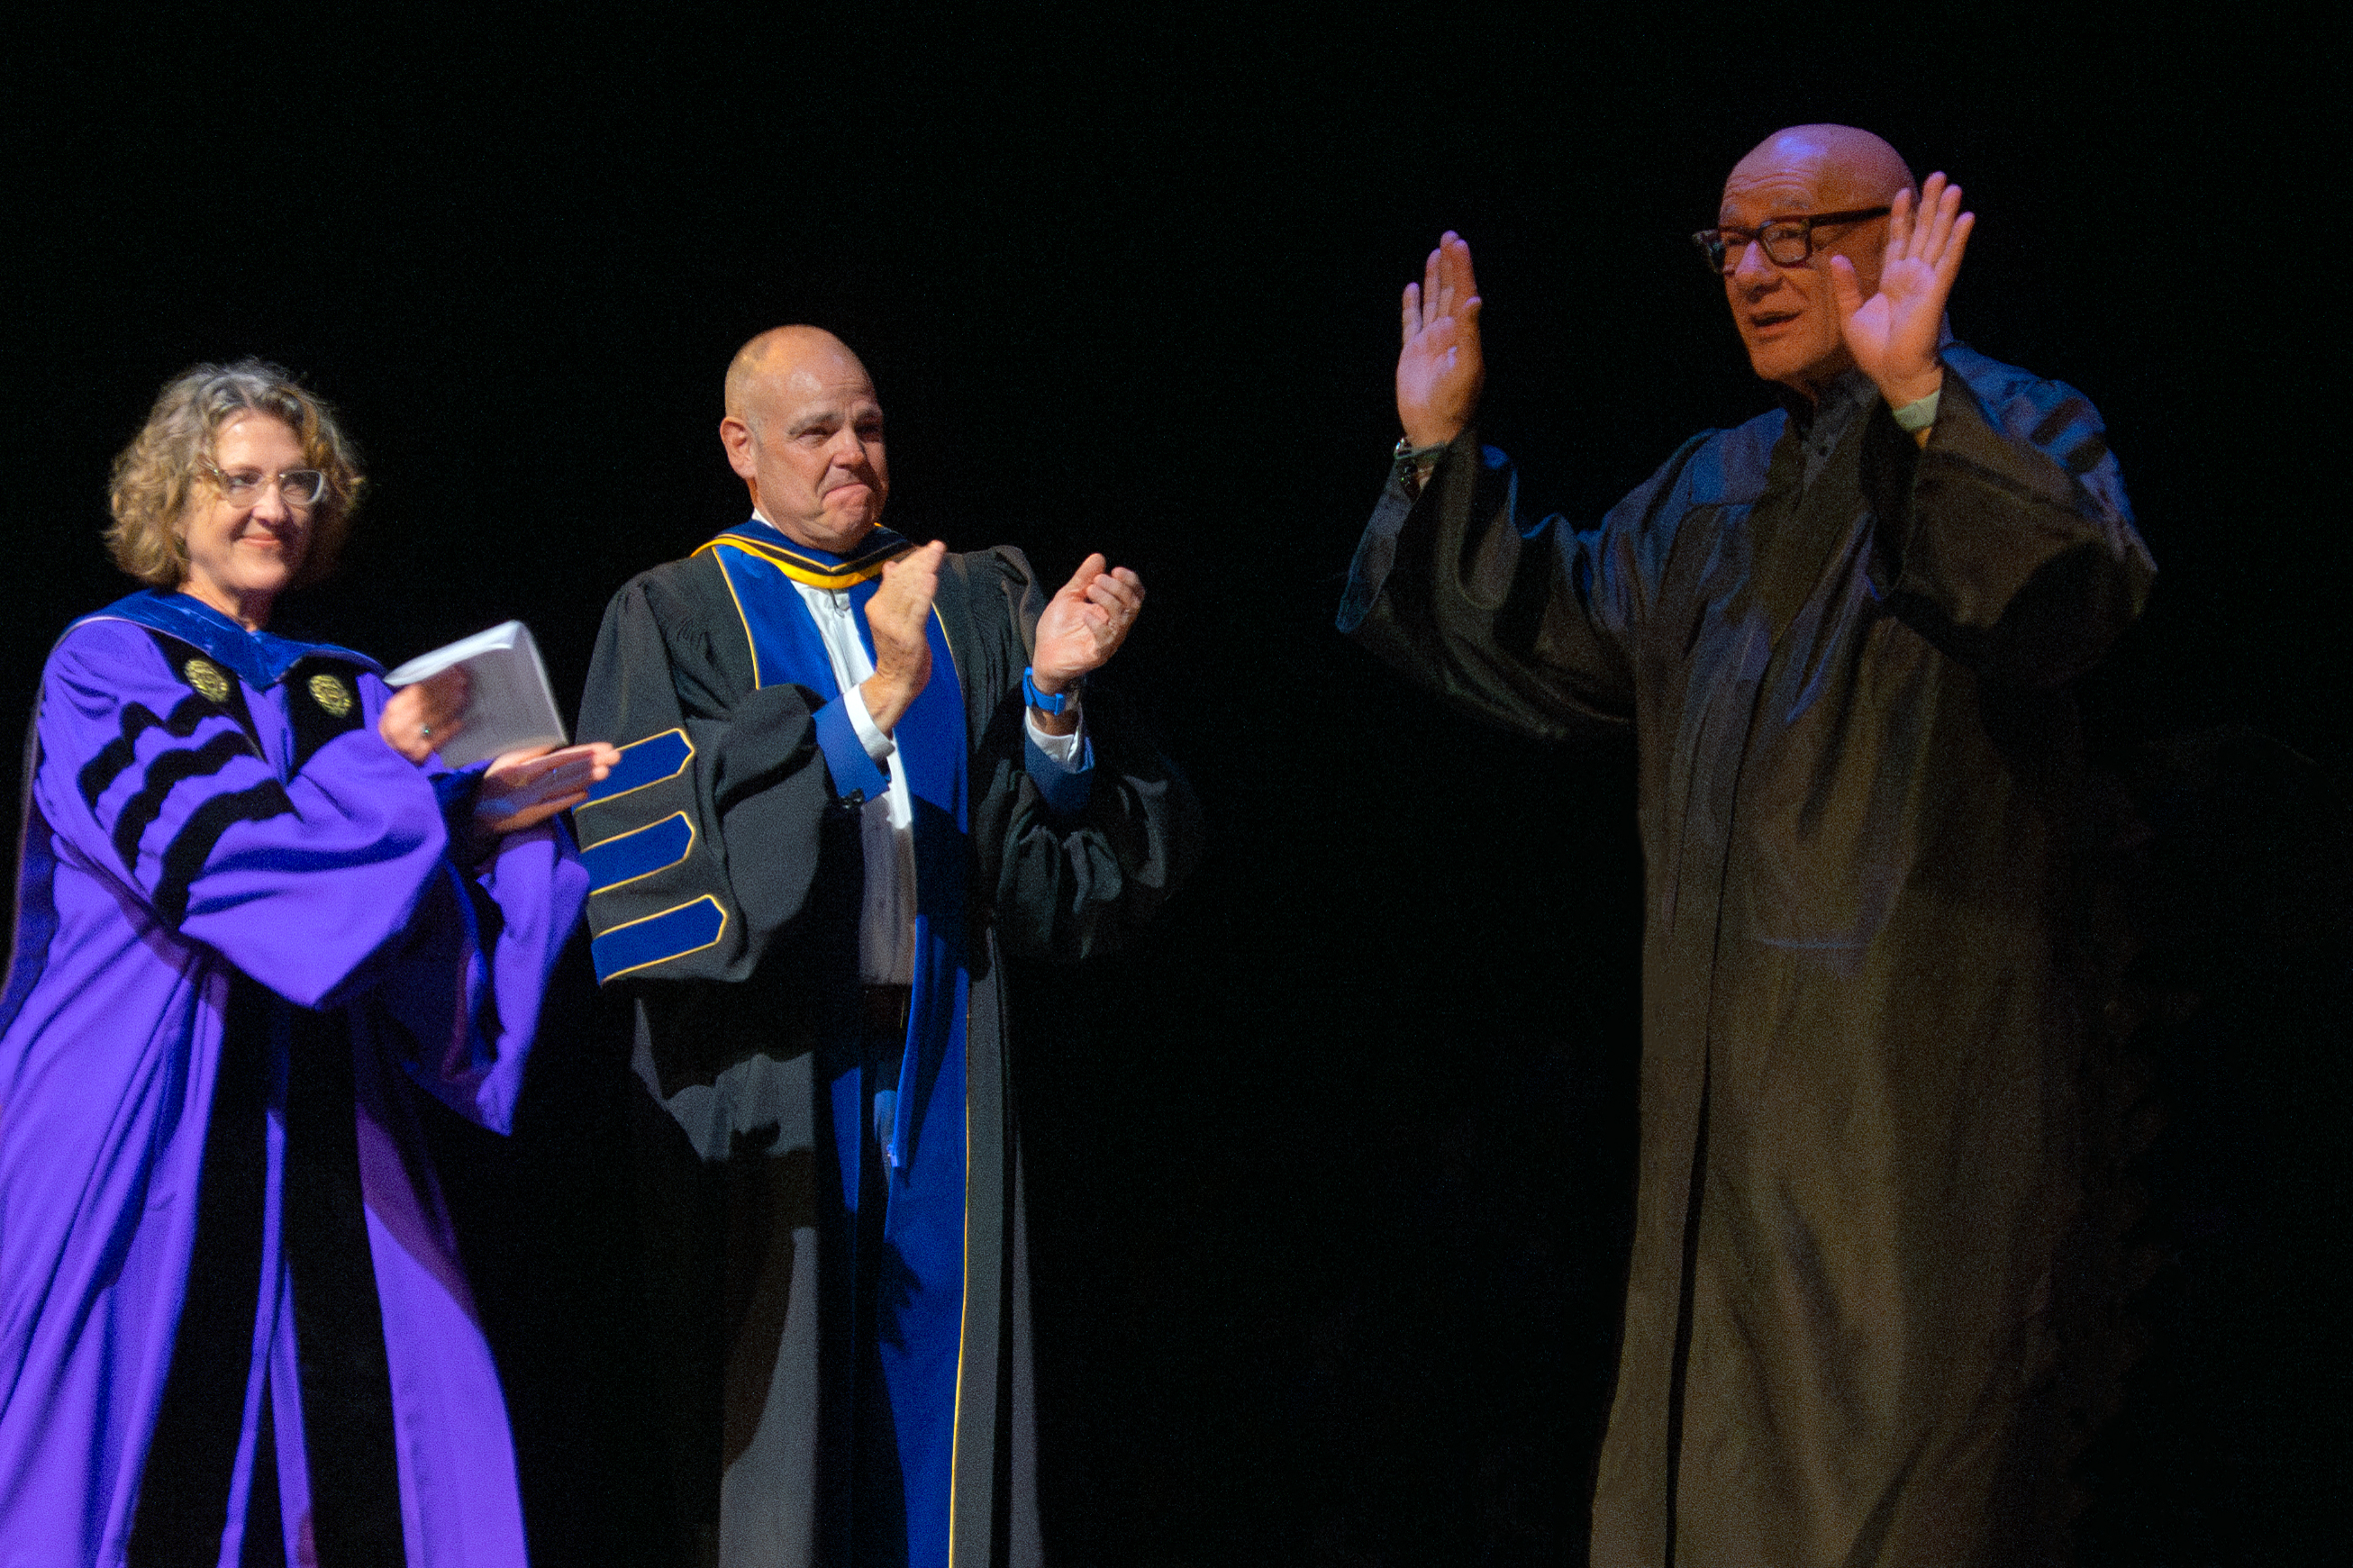 Faculty applaud a colleague during commencement, who holds his arms up